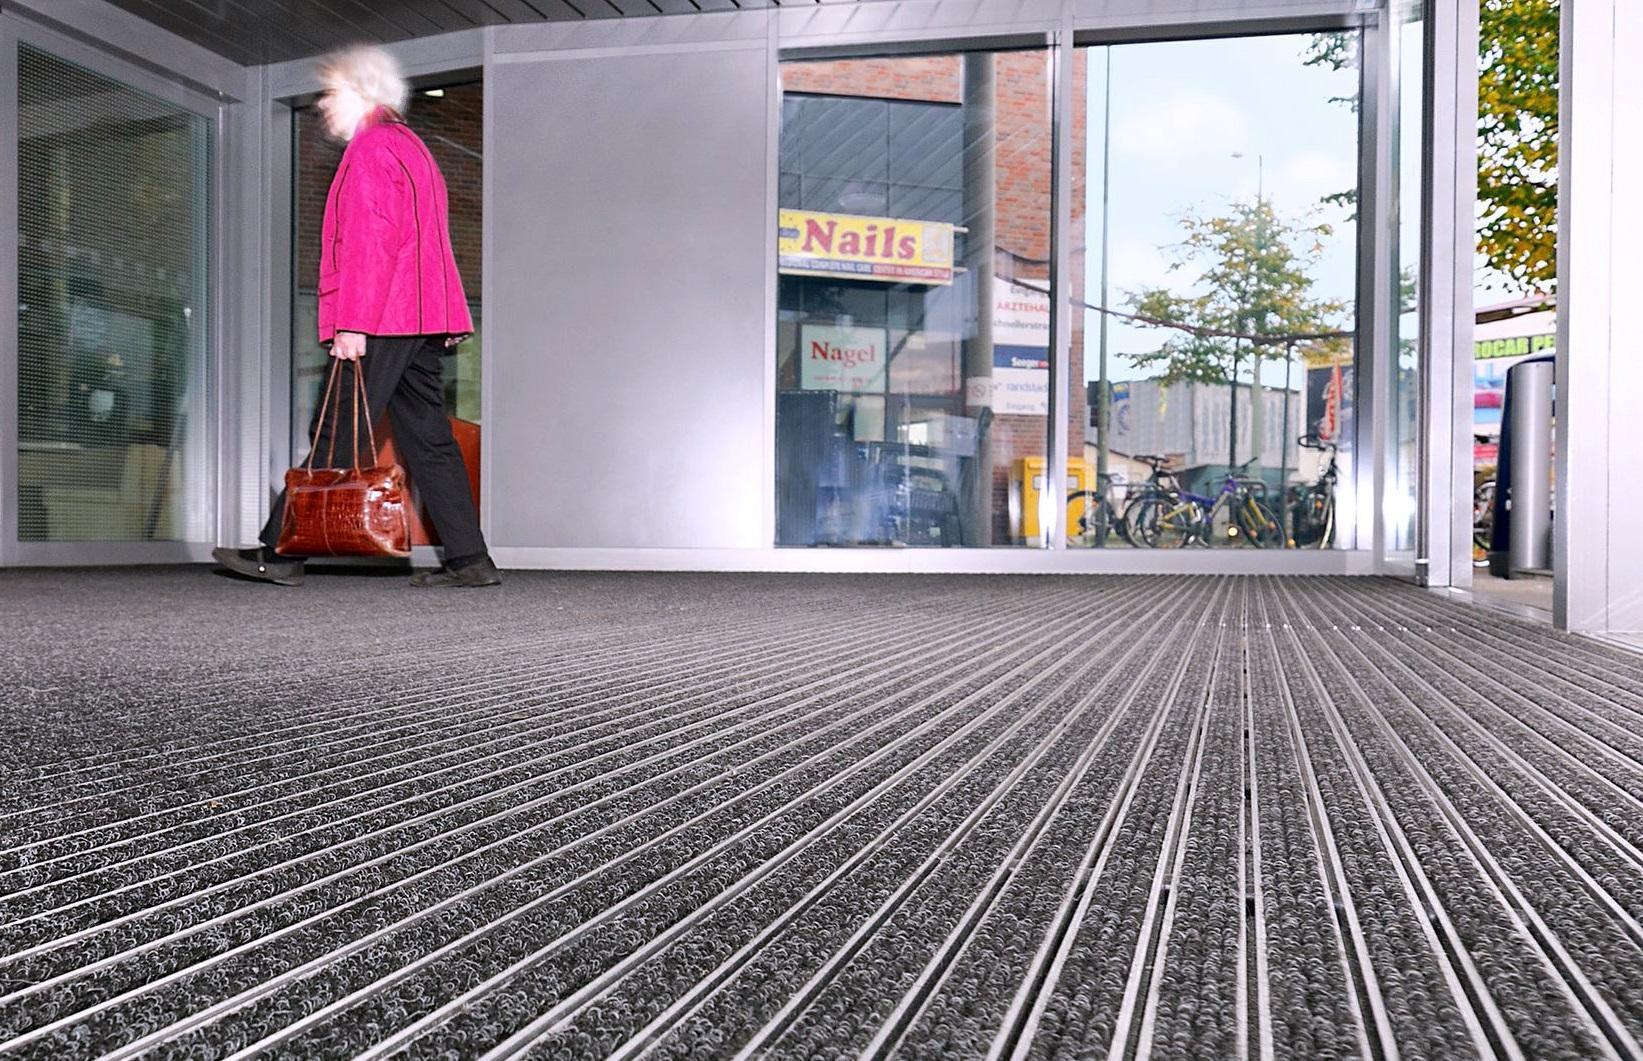 Department Store Entrance Matting from GEGGUS Gmbh